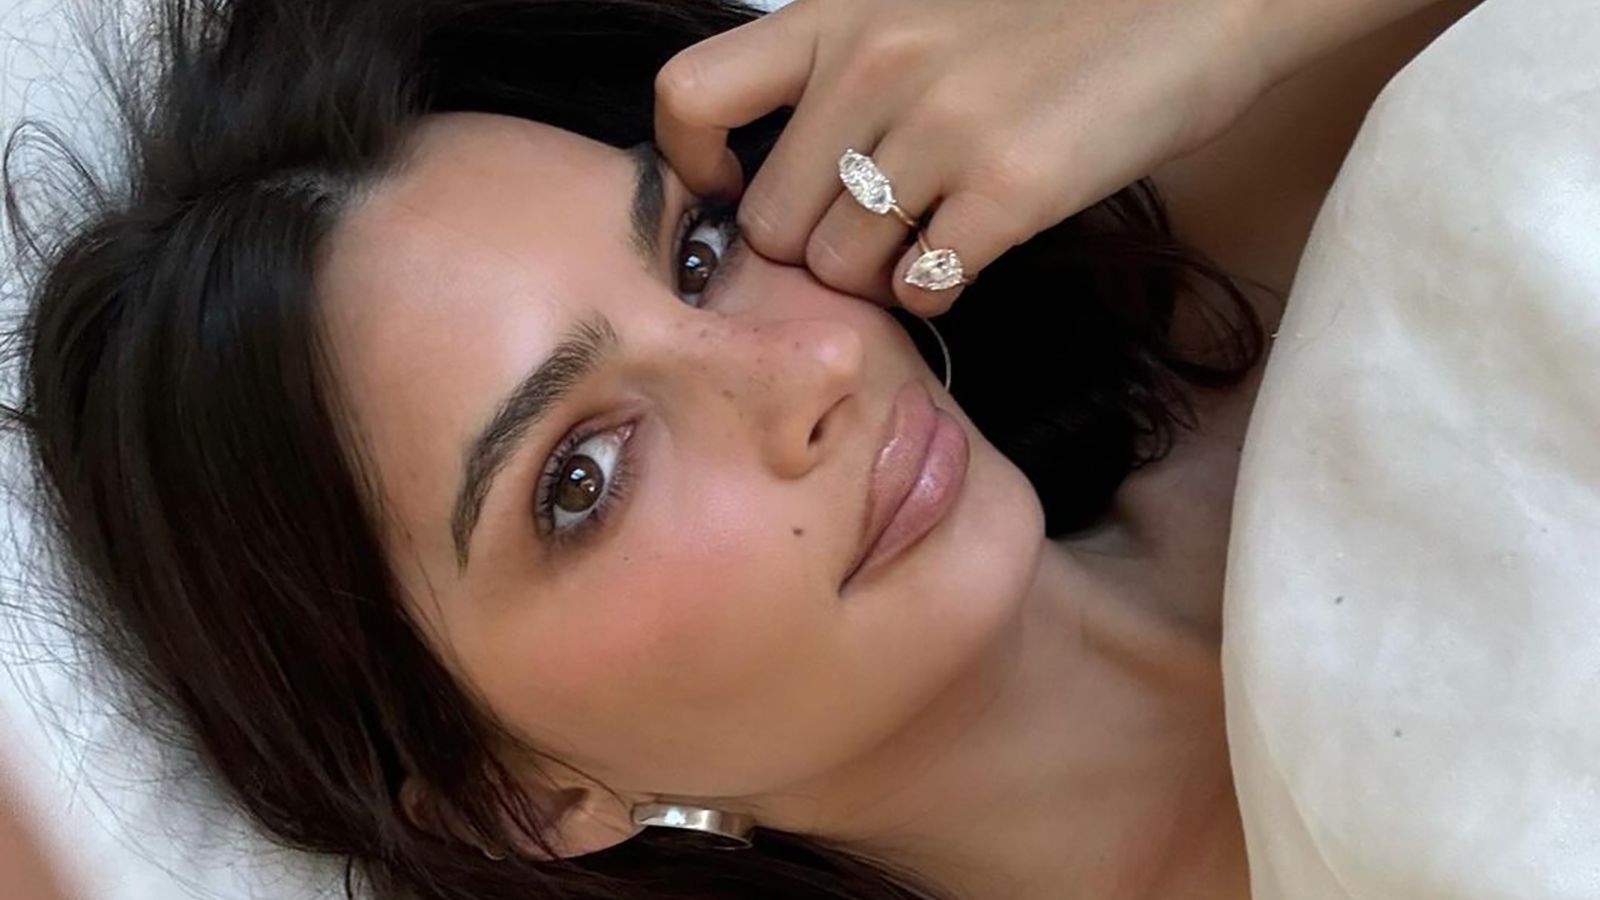 The model shared images of her new rings to Instagram.